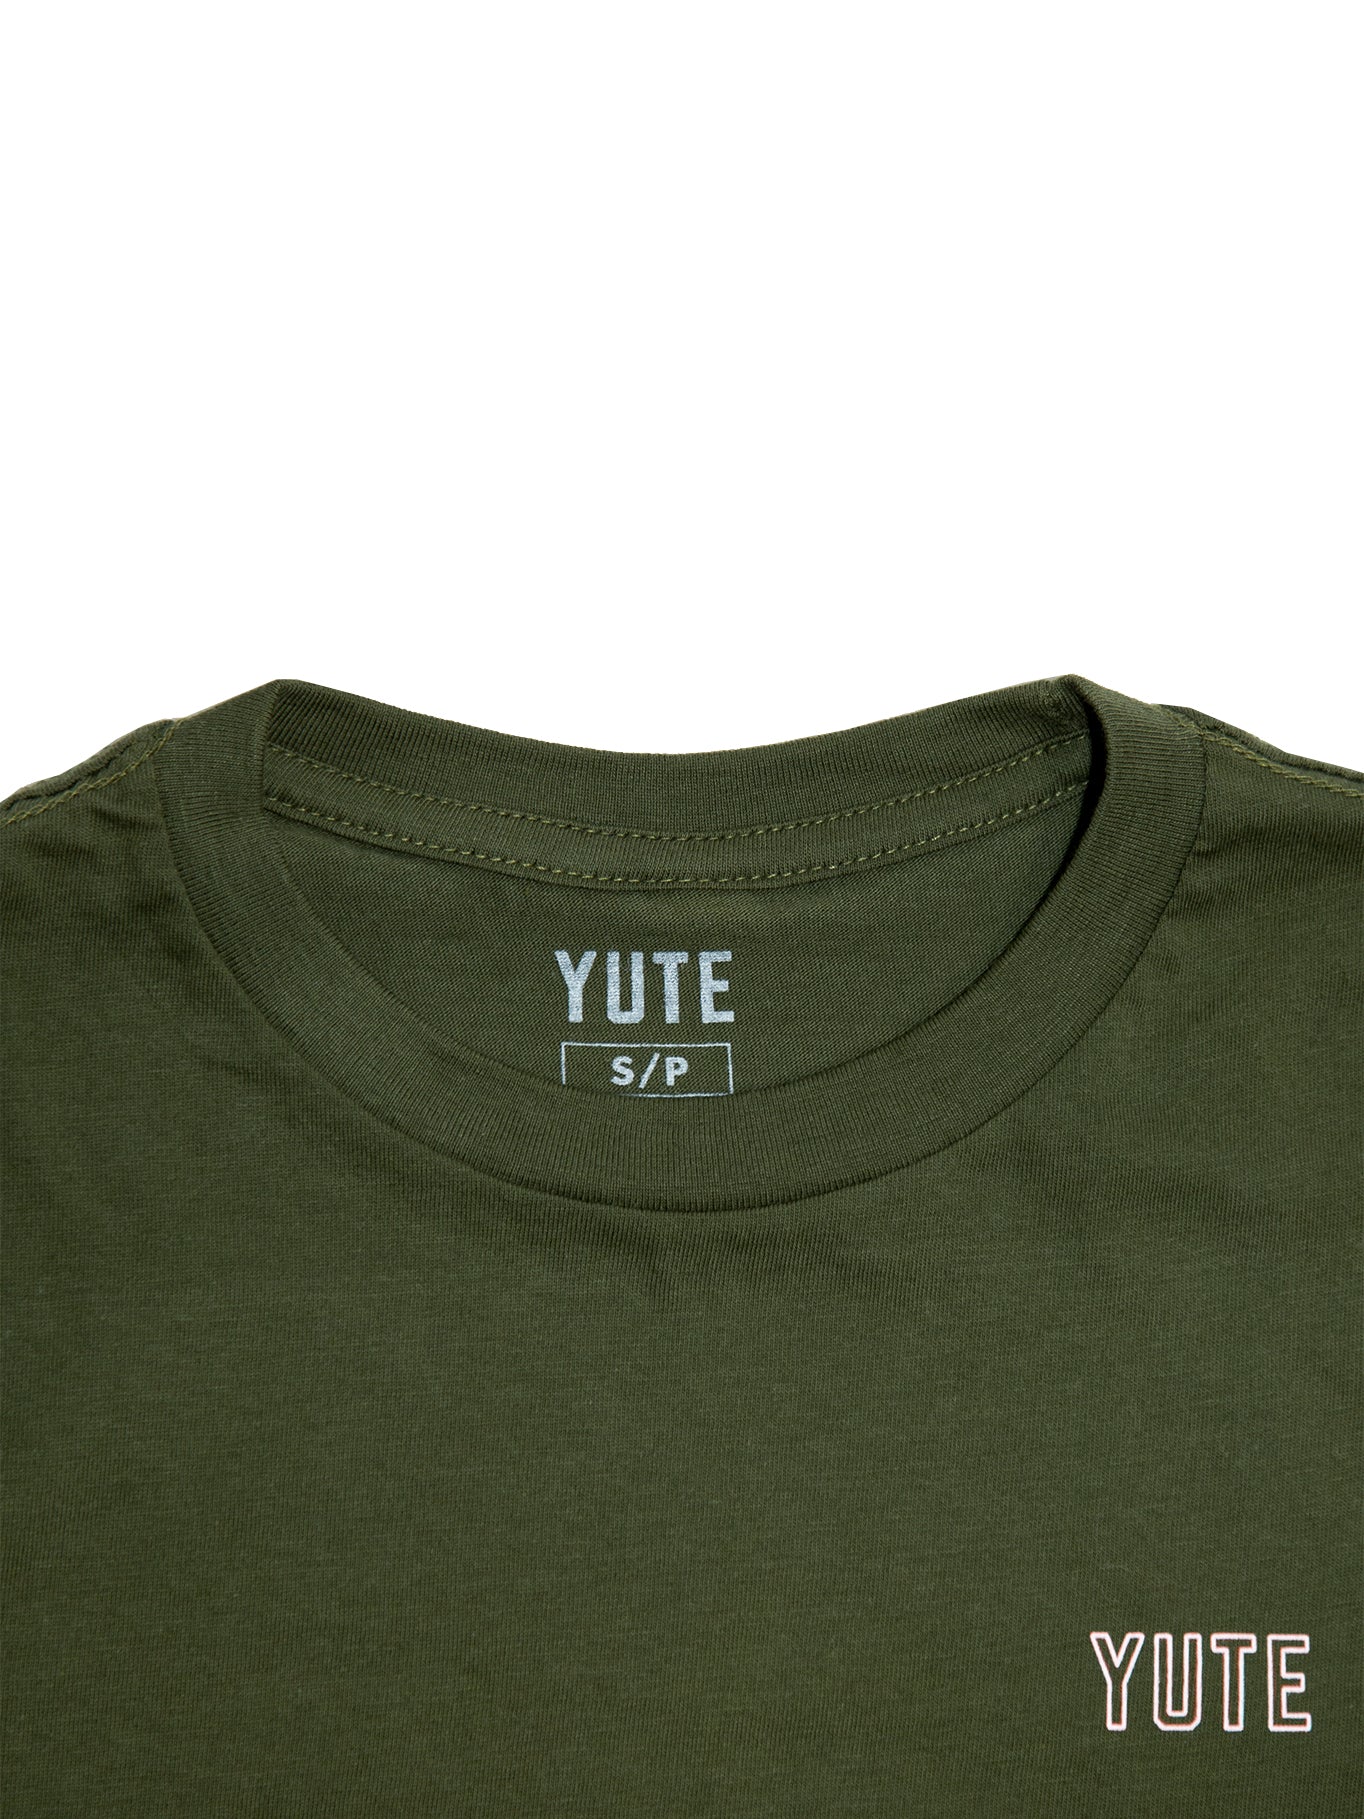 Close up of collar with YUTE branded tag